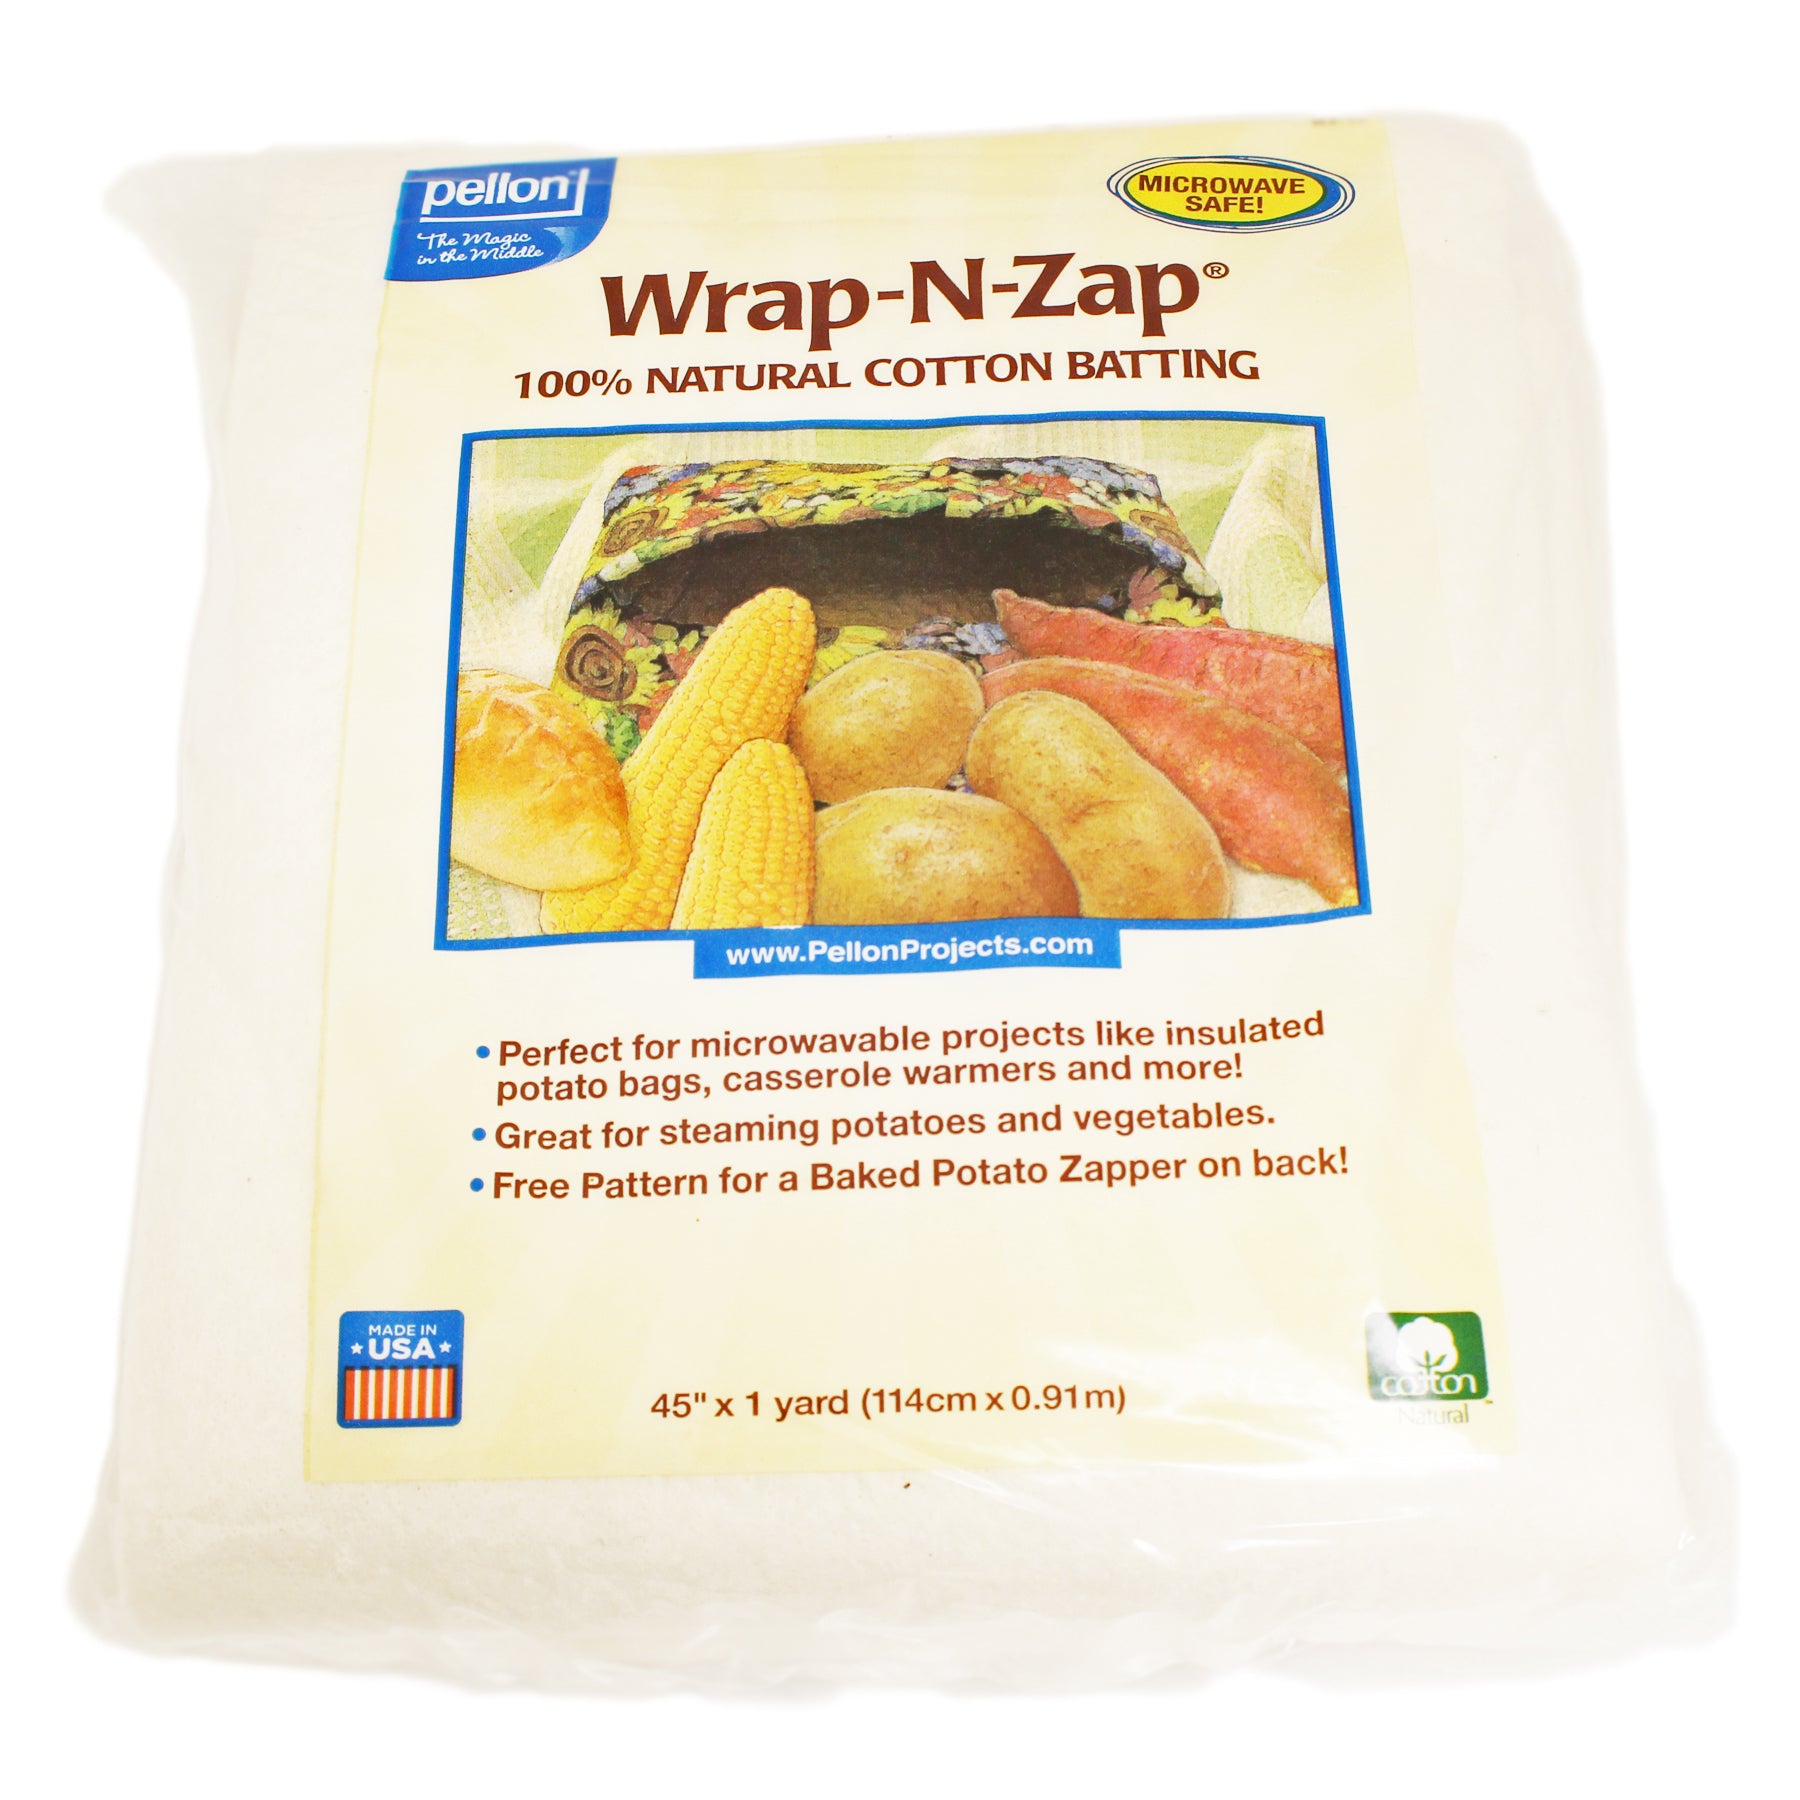 Pellon Wrap-N-Zap Microwavable Natural Cotton Batting for Crafts 45” x 36”  (1 yard pre-cut) Oven Mitts Cozies Machine Washable Low Loft